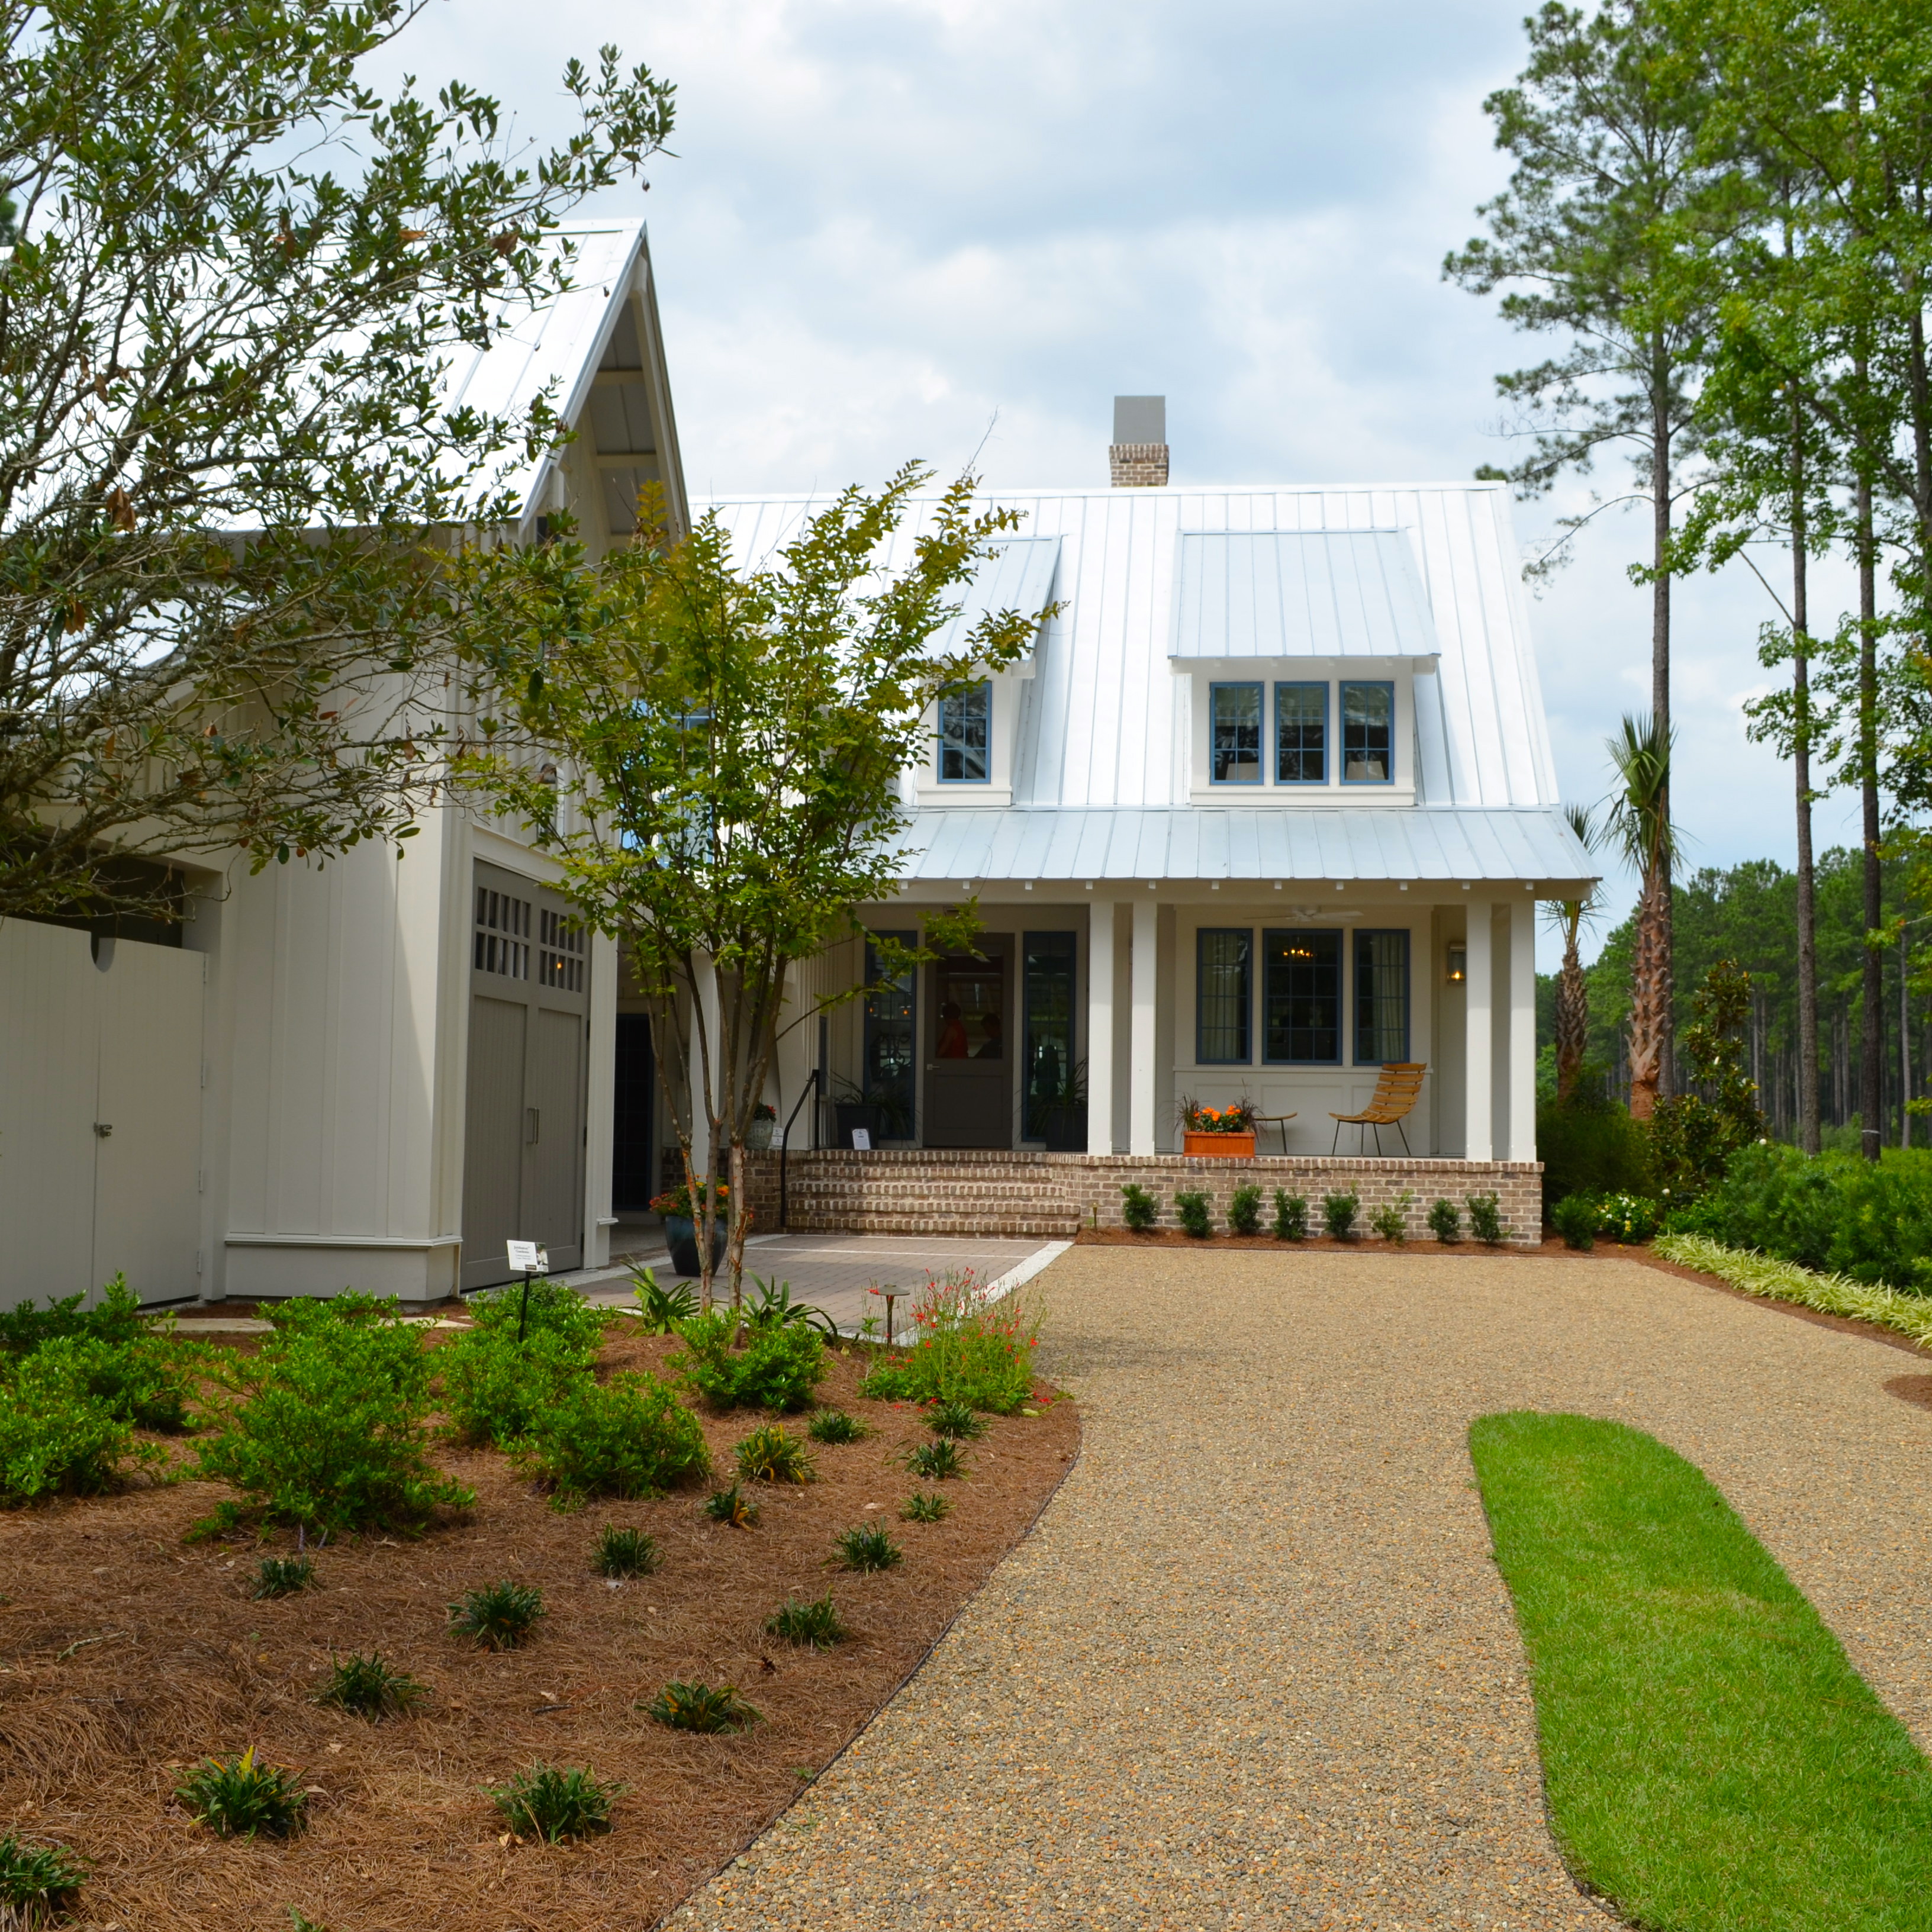 Palmetto Bluff Idea House A TOUR OF THE SOUTHERN LIVING IDEA HOUSE  House of Turquoise  by Guest Blogger